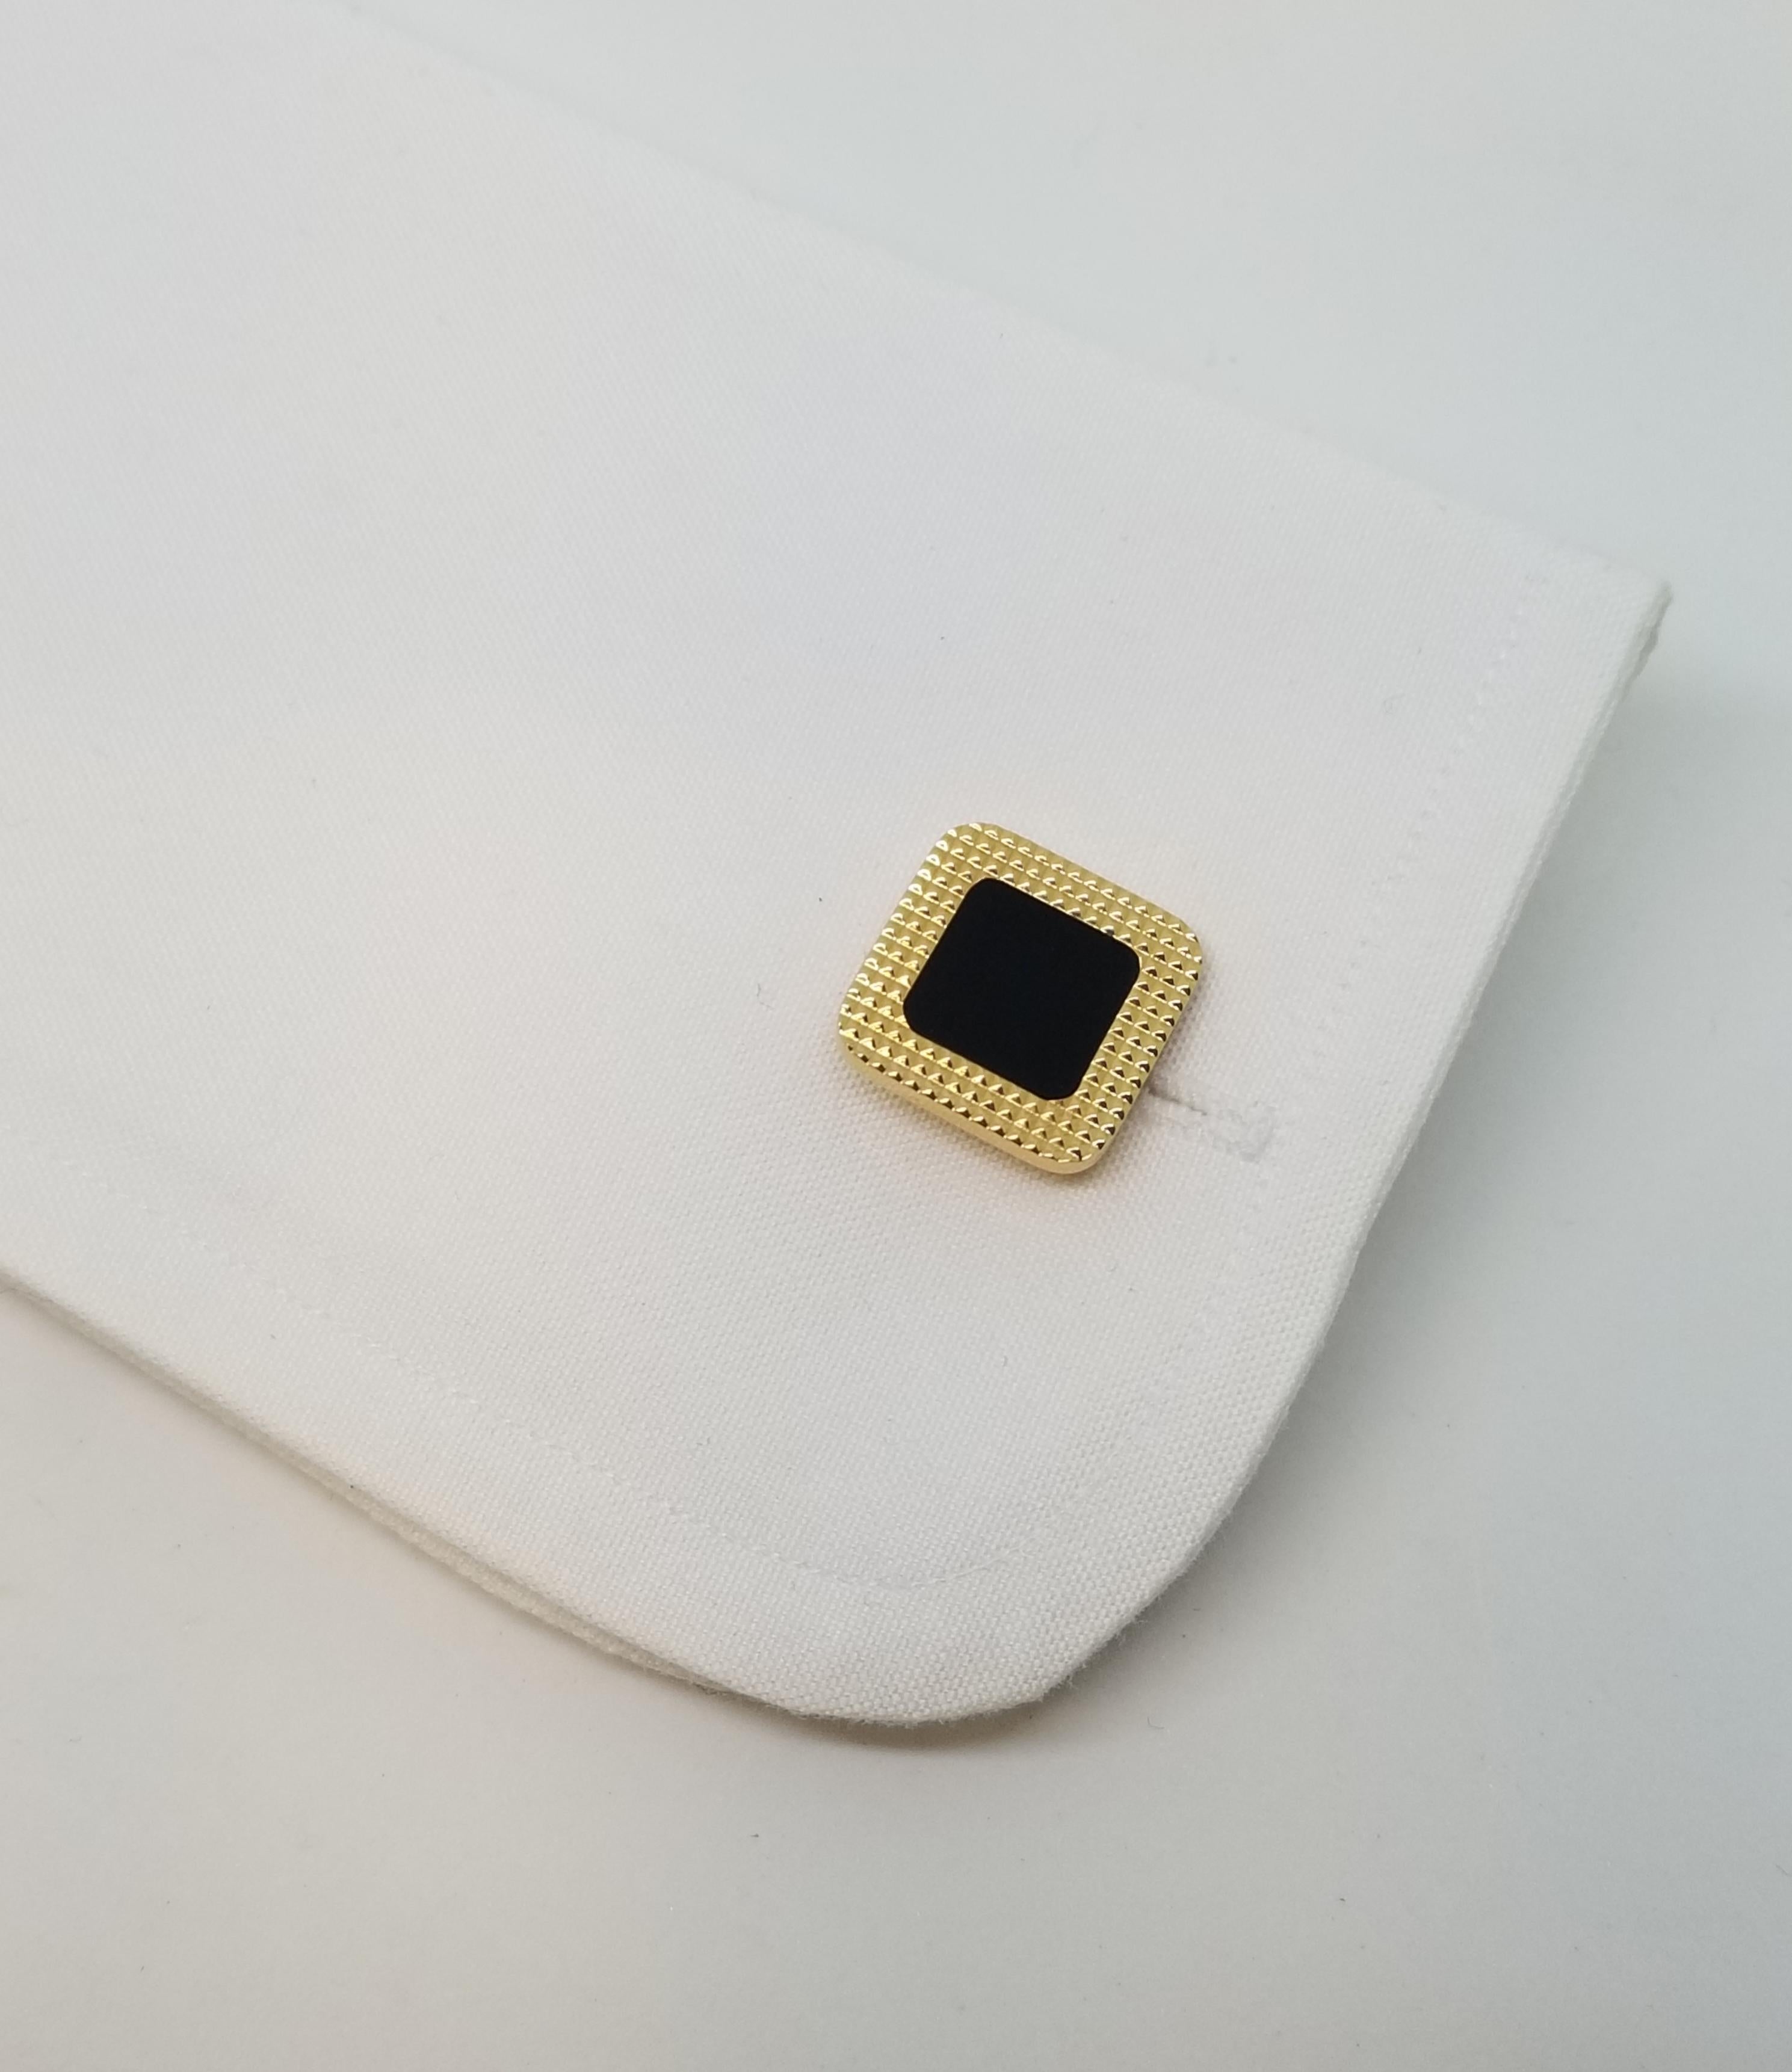 Contemporary Textured Onyx and Gold Square Cufflinks